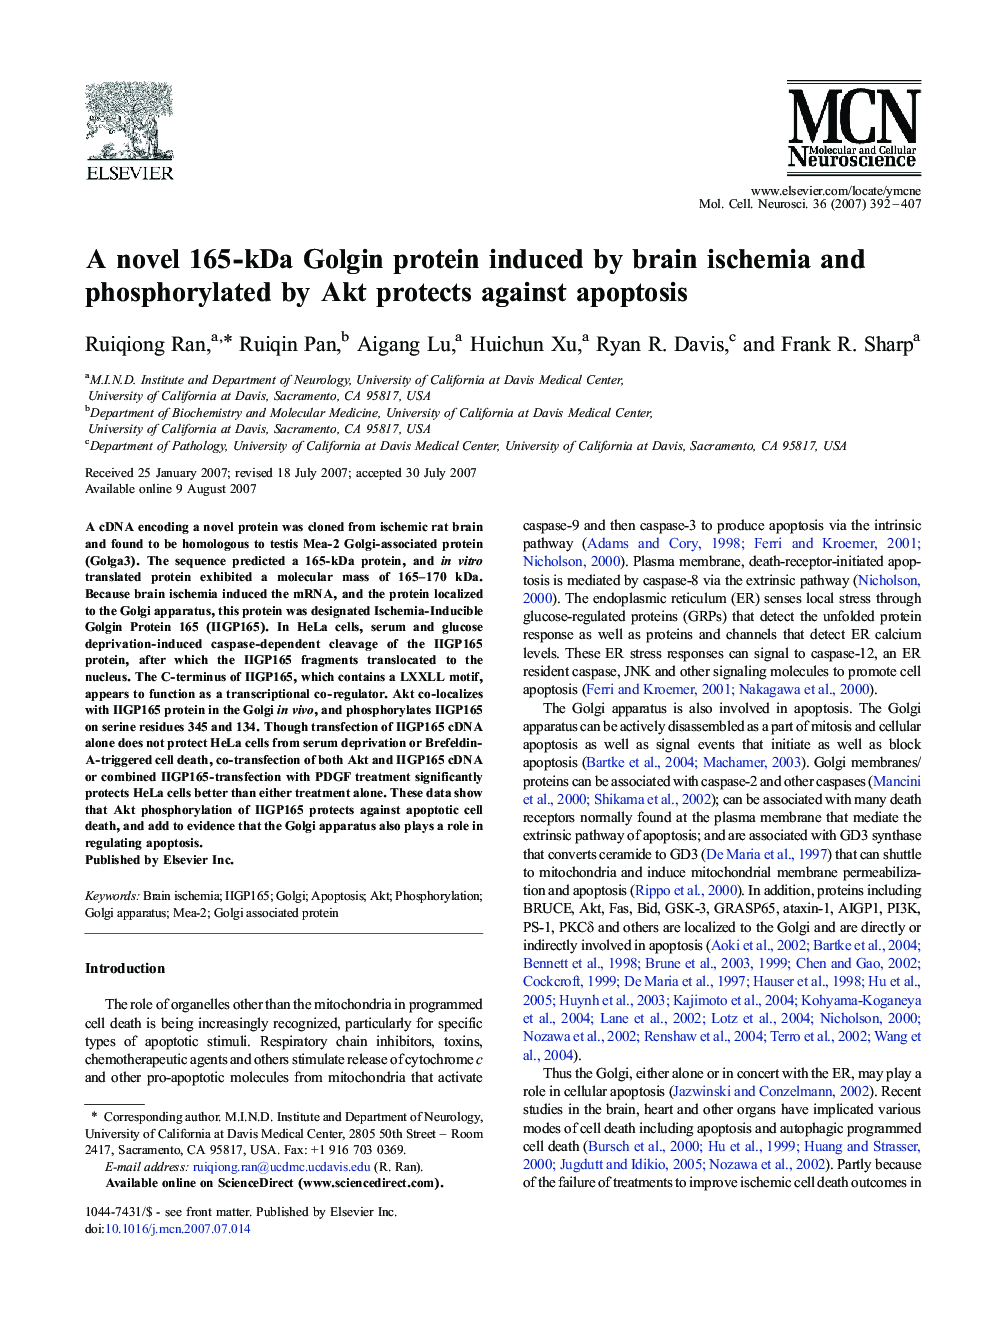 A novel 165-kDa Golgin protein induced by brain ischemia and phosphorylated by Akt protects against apoptosis